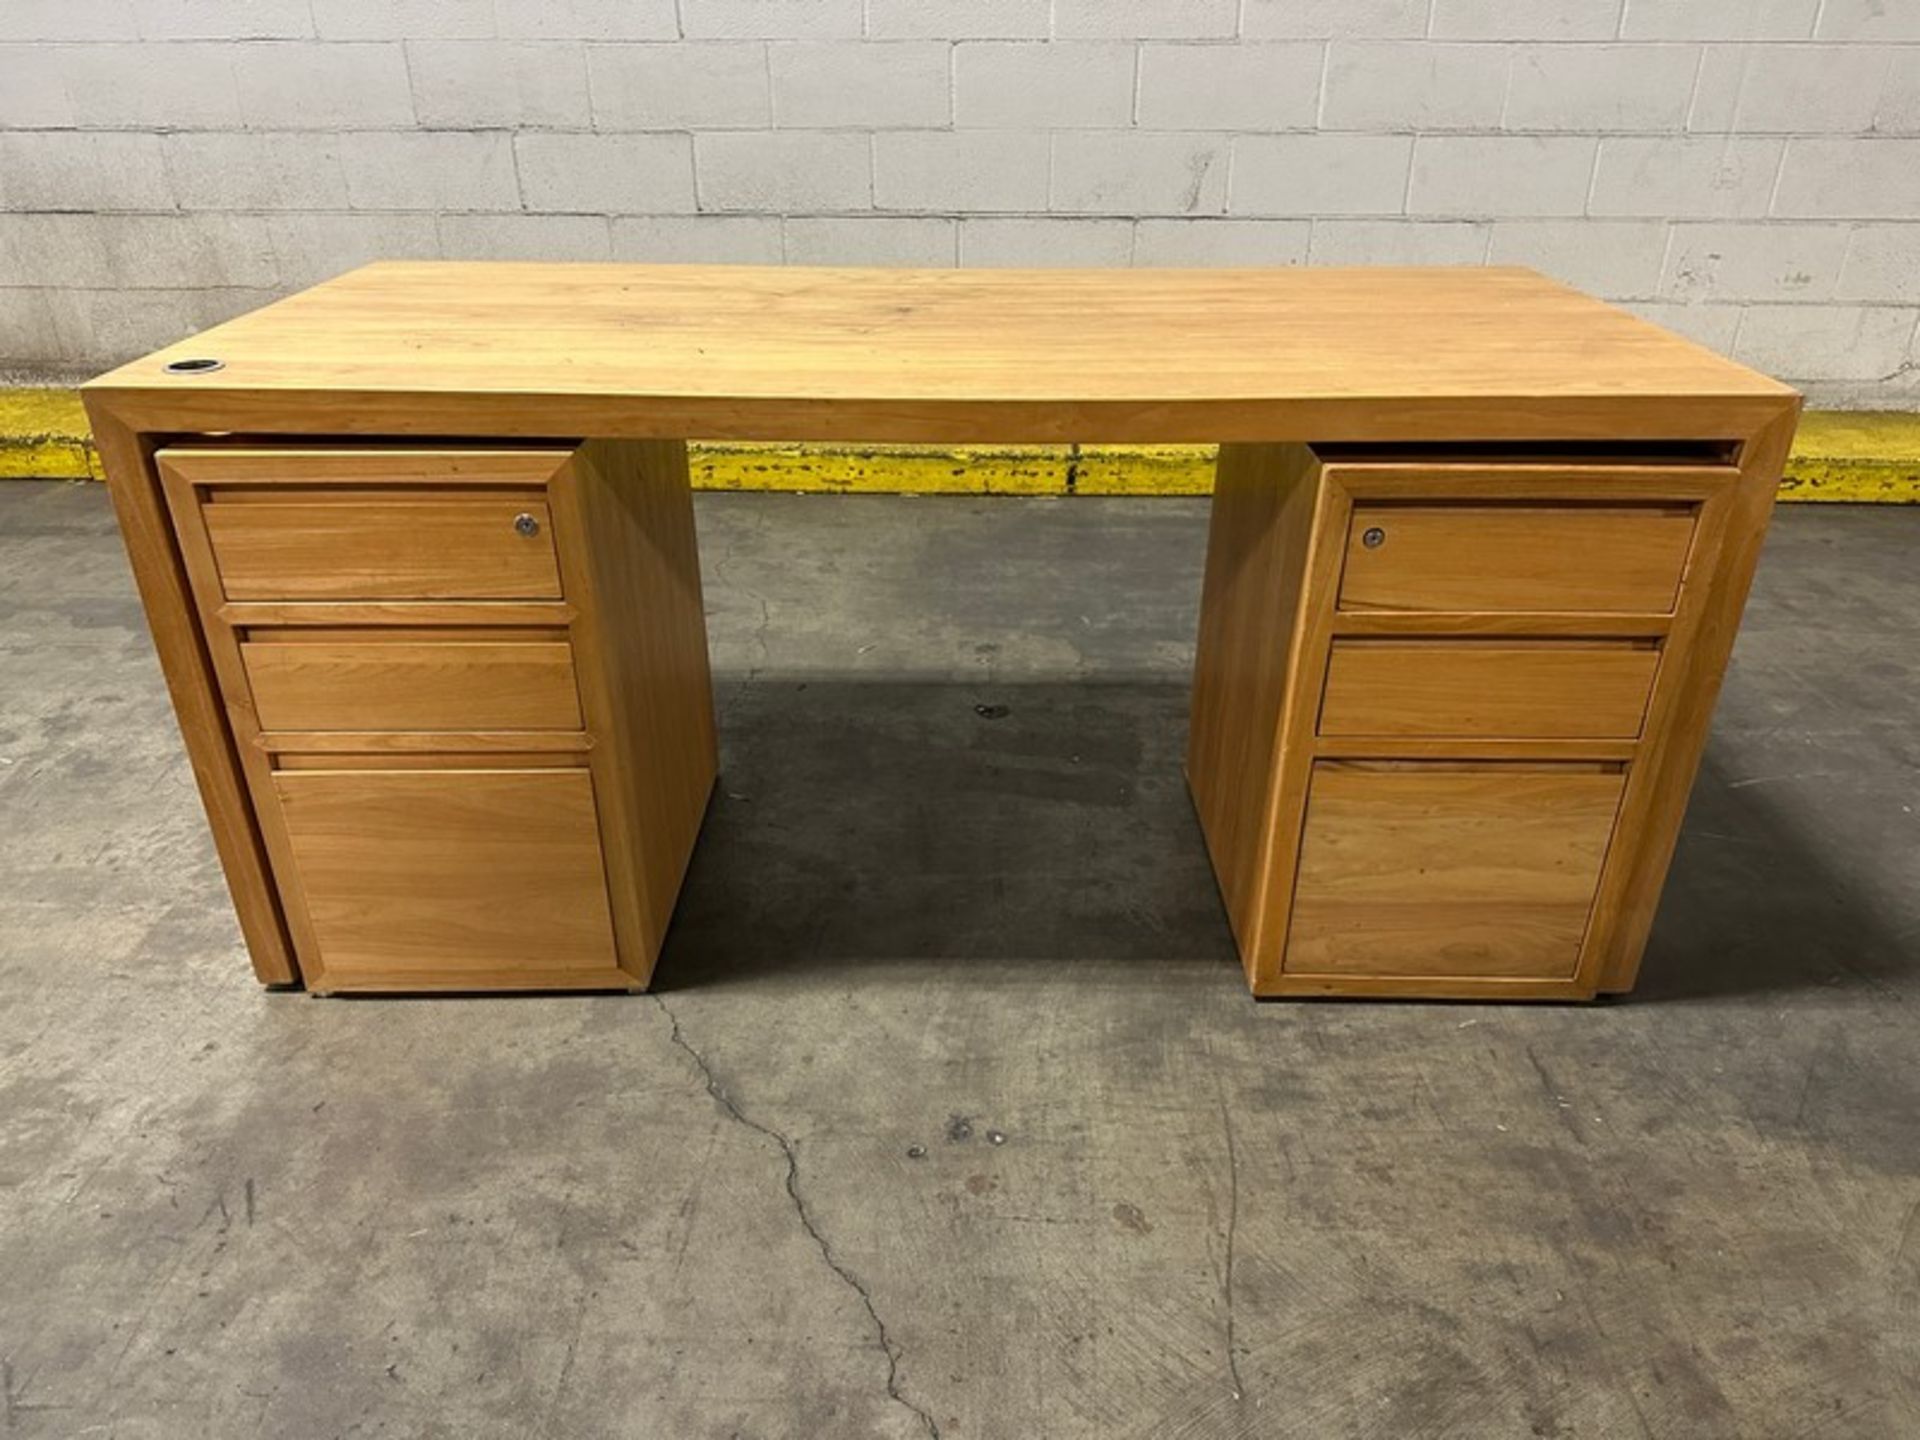 Desks: LOT (7pcs) 66" x 30" x 29"h (Located East Rutherford, NJ) (NOTE: REMOVAL 2-DAYS ONLY